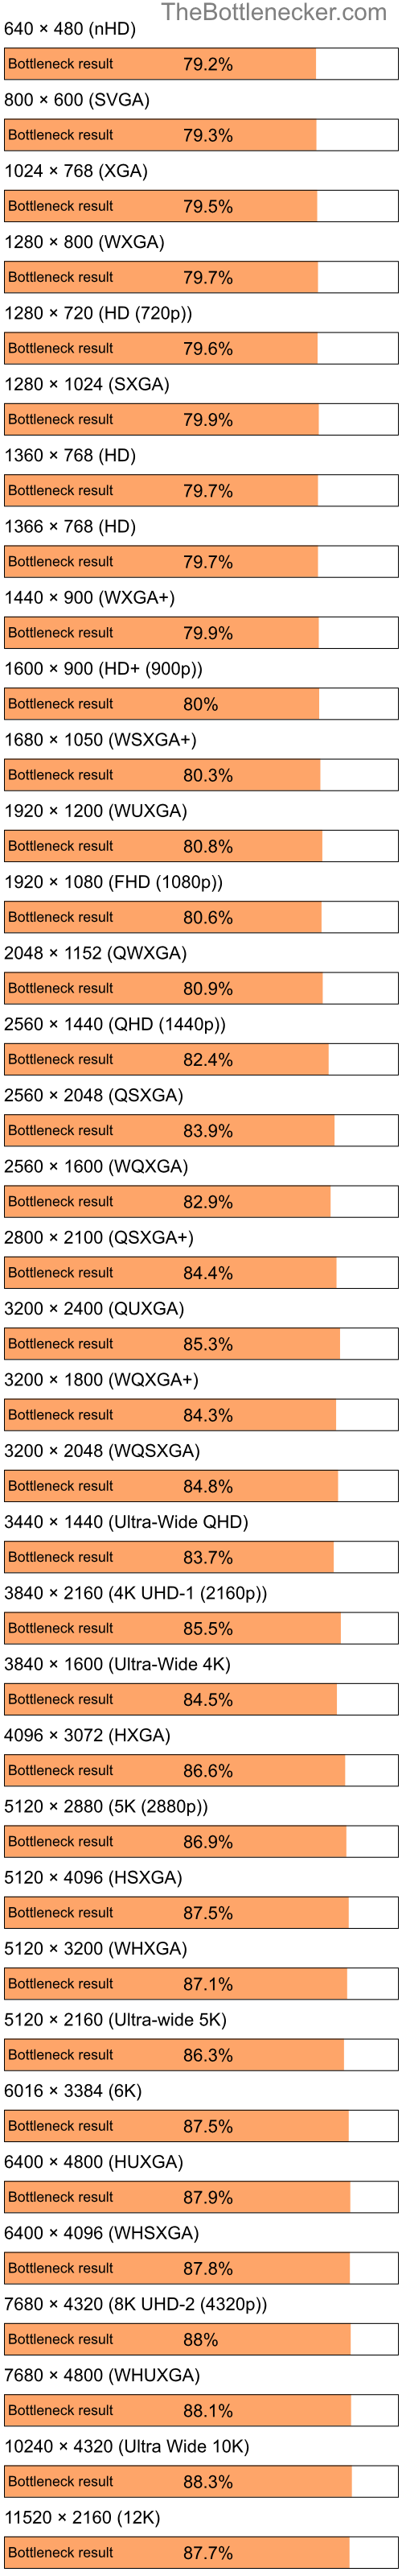 Bottleneck results by resolution for Intel Atom N280 and AMD Radeon 9550 in7 Days to Die